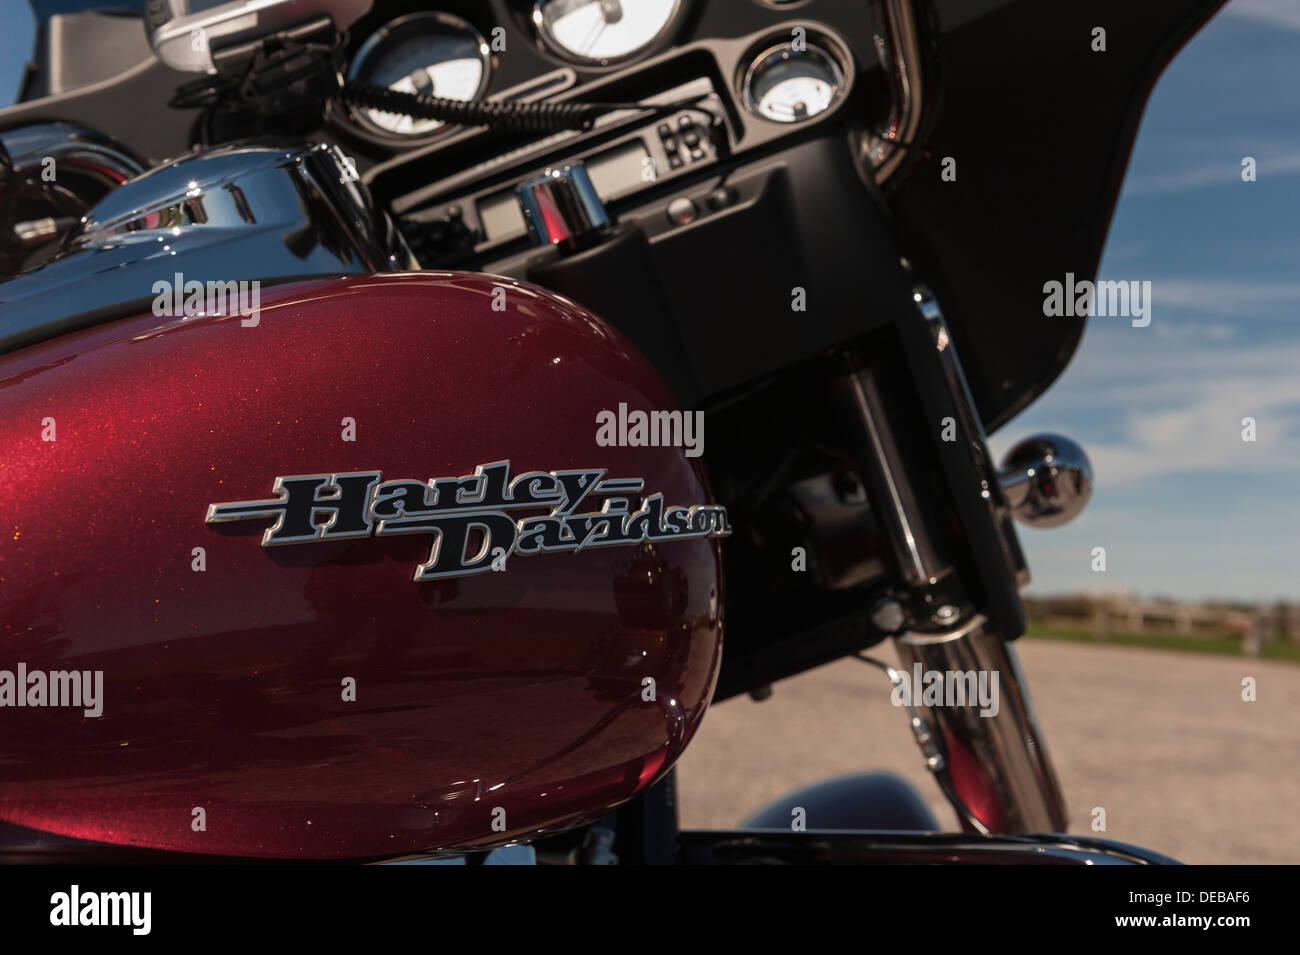 Harley Davidson Motorcycle Logo on the side of a 2012 Street Glide Touring Cycle Stock Photo